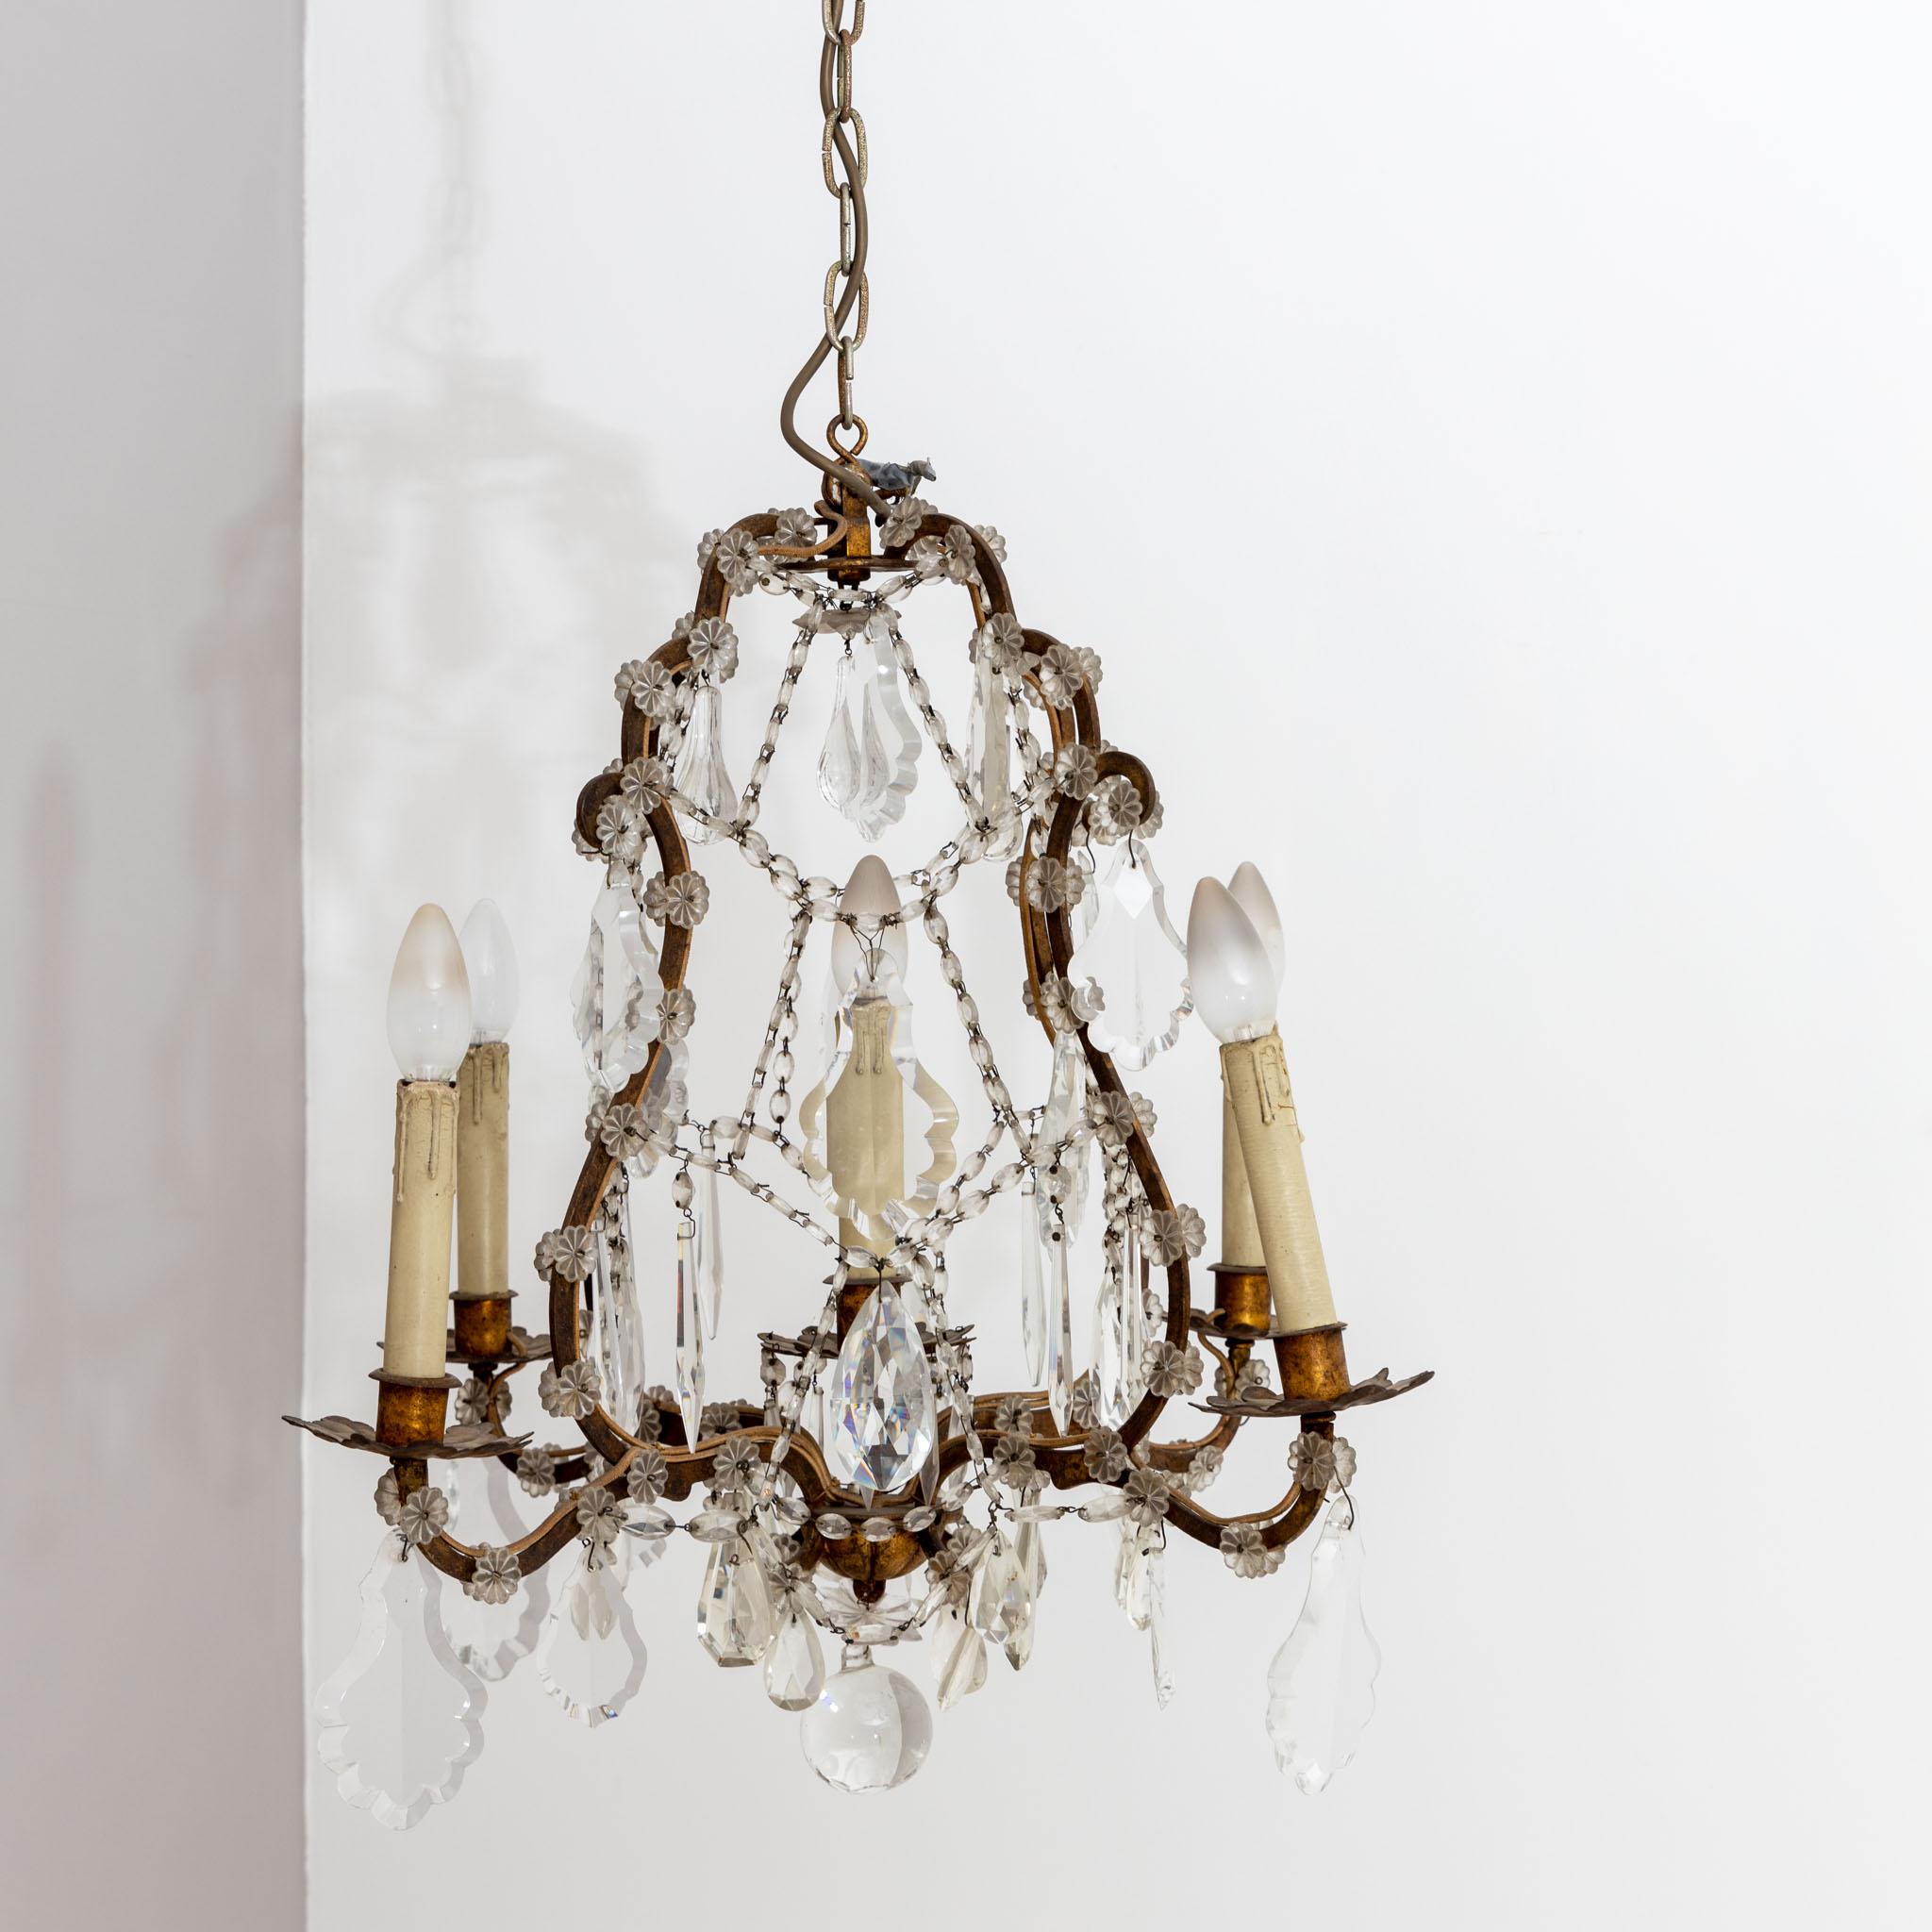 Chandelier made of patinated brass with glass prisms and five sockets in the shape of stylised wax candles. The glass hanging consists of cut prisms, partly oval and partly in leaf shape, small flowers as well as a spherical pendant in the centre.